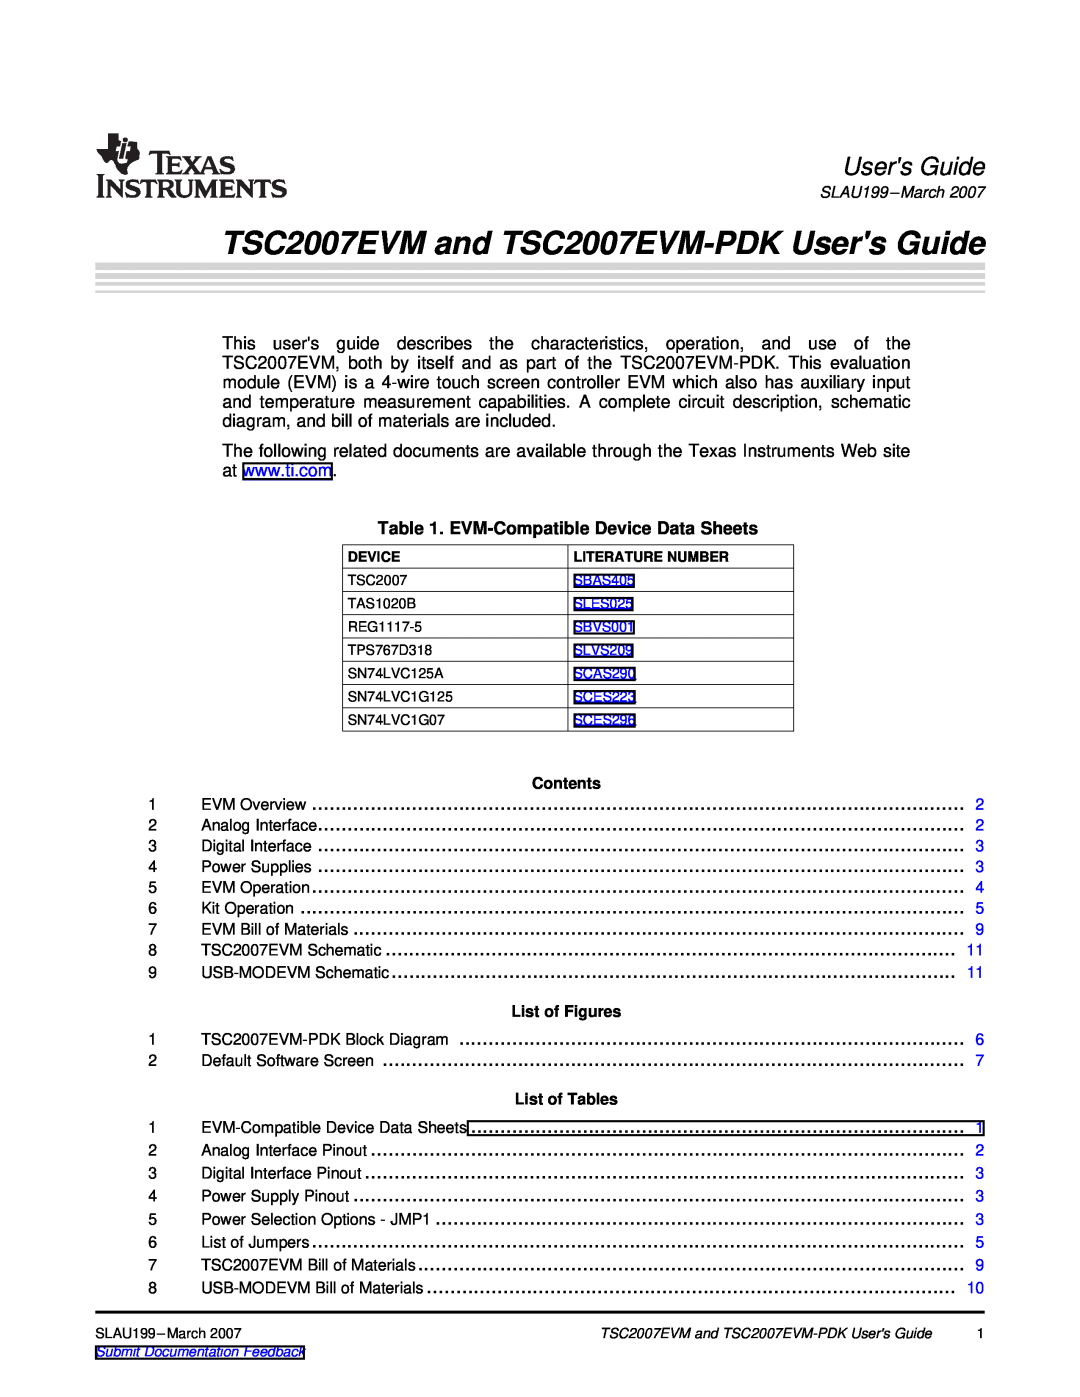 Texas Instruments manual TSC2007EVM and TSC2007EVM-PDK Users Guide 